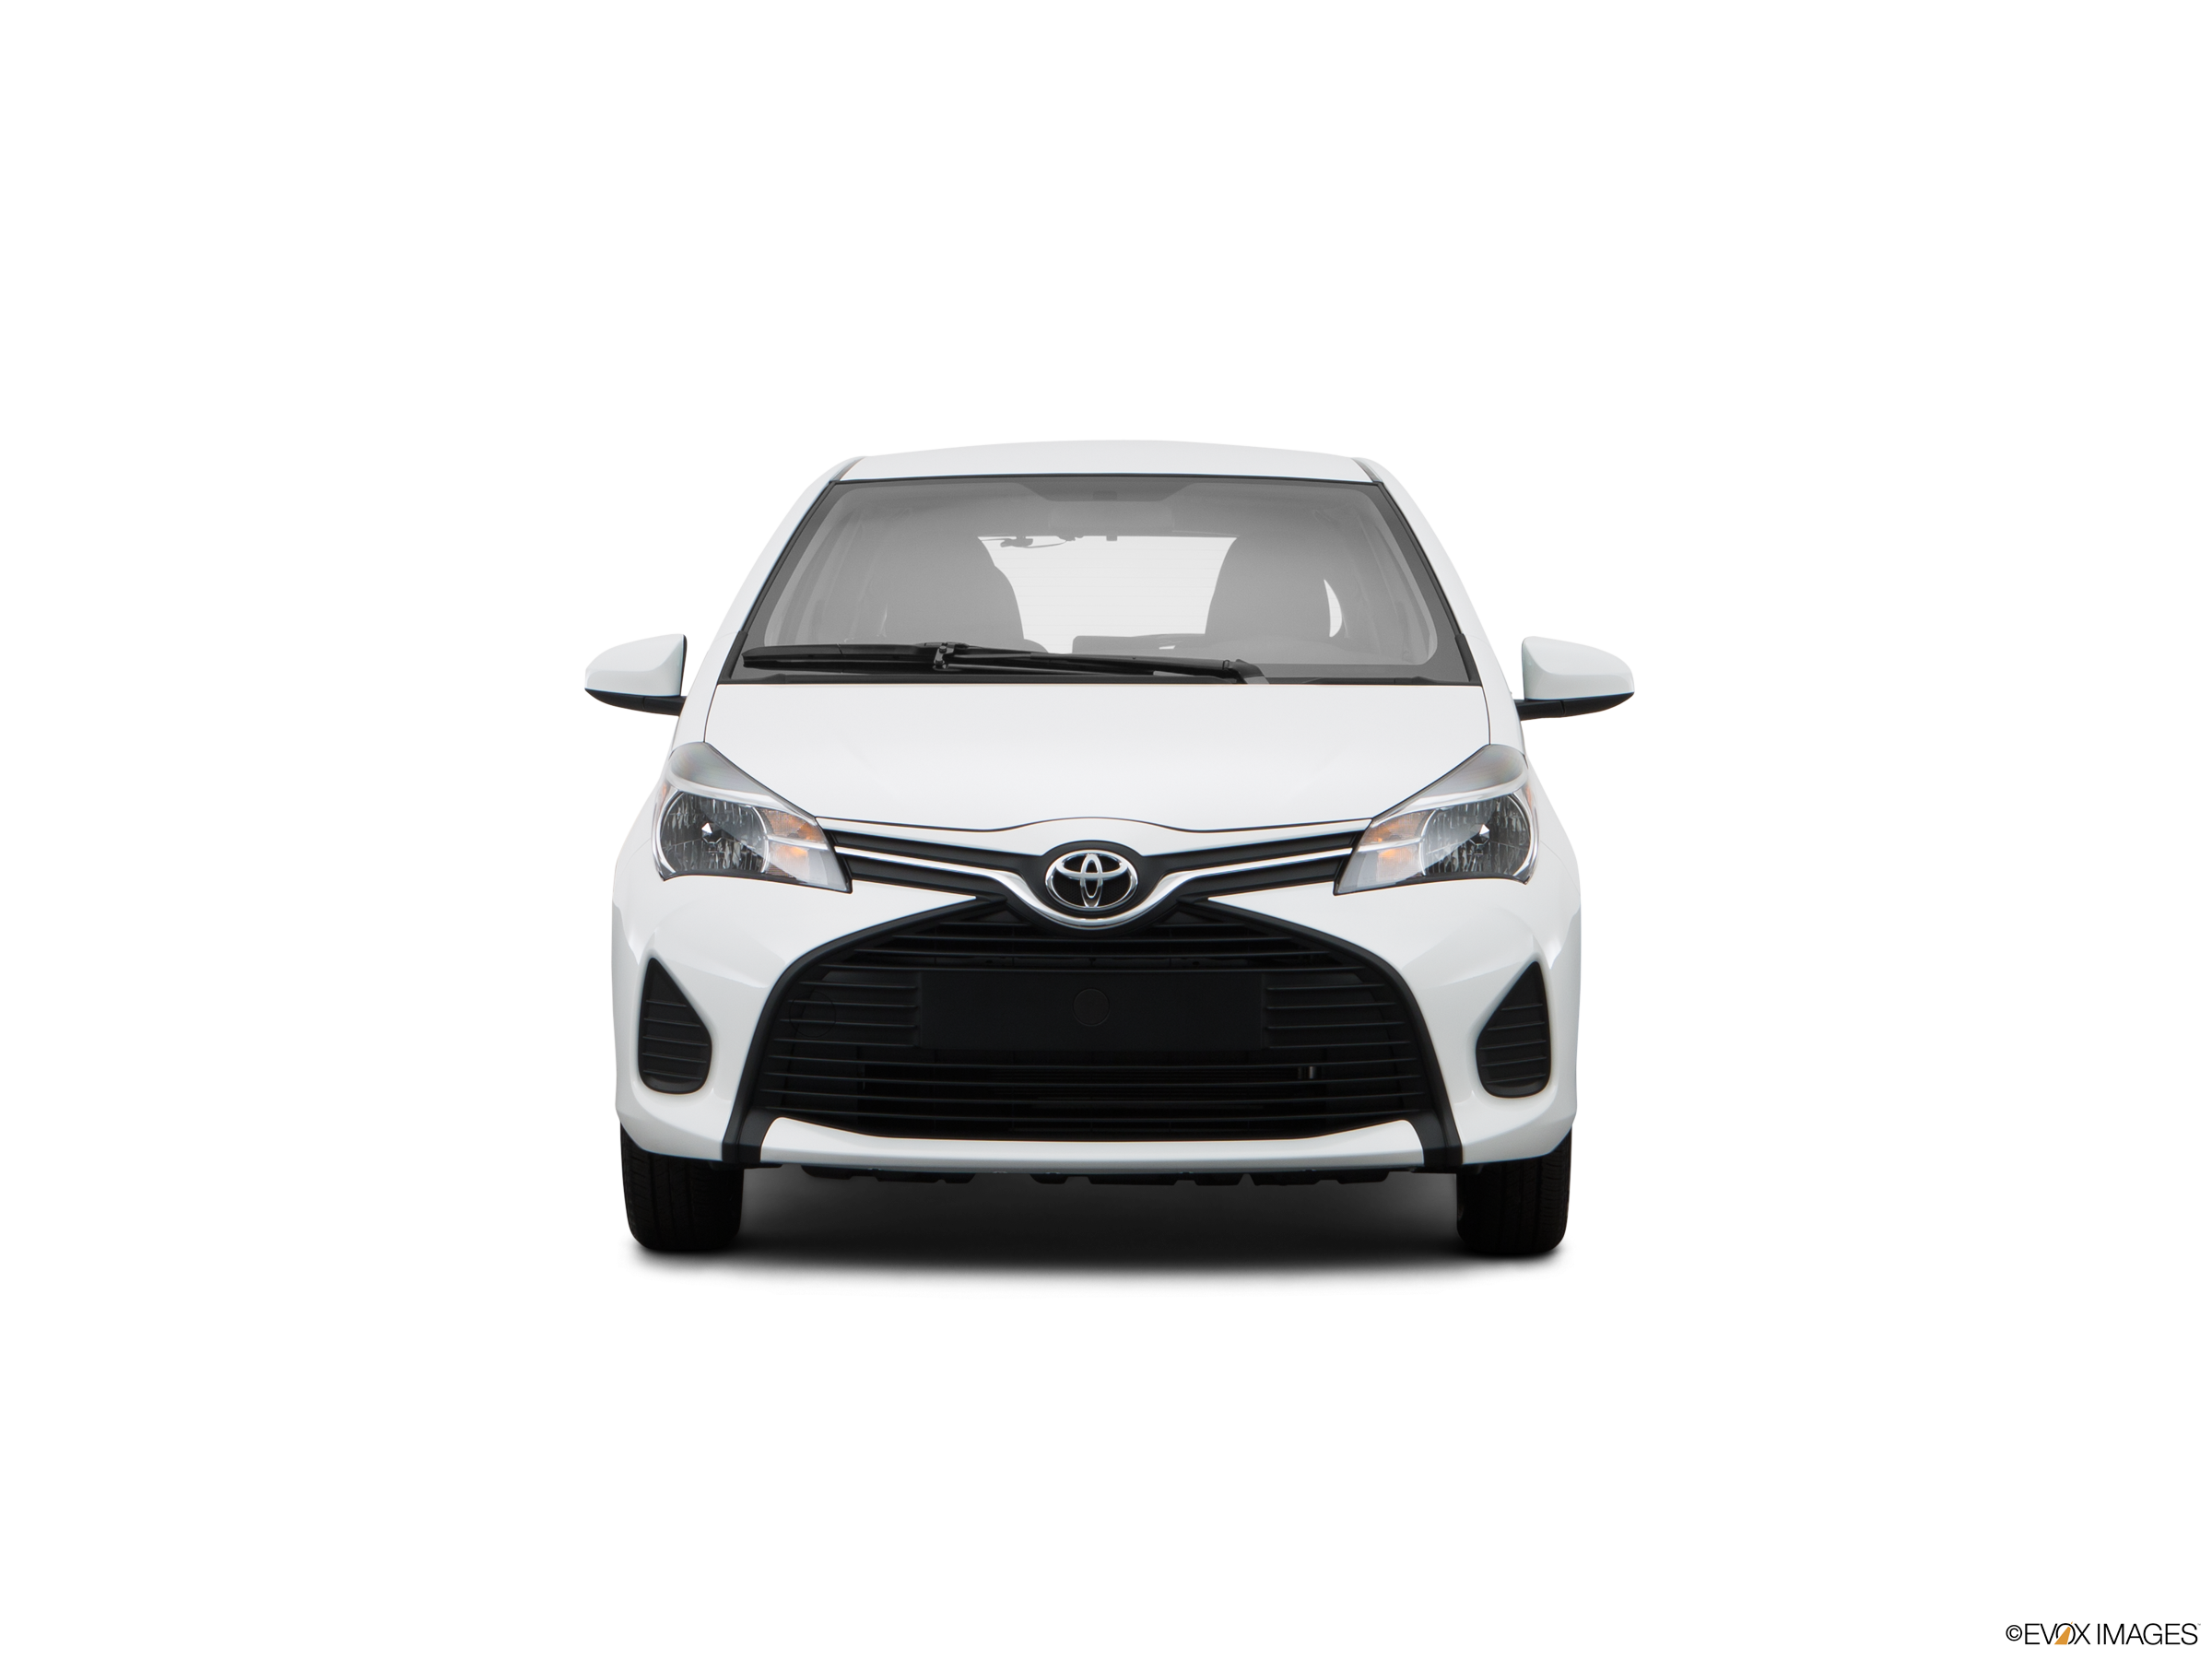 2015 Toyota Yaris Review, Ratings, Specs, Prices, and Photos - The